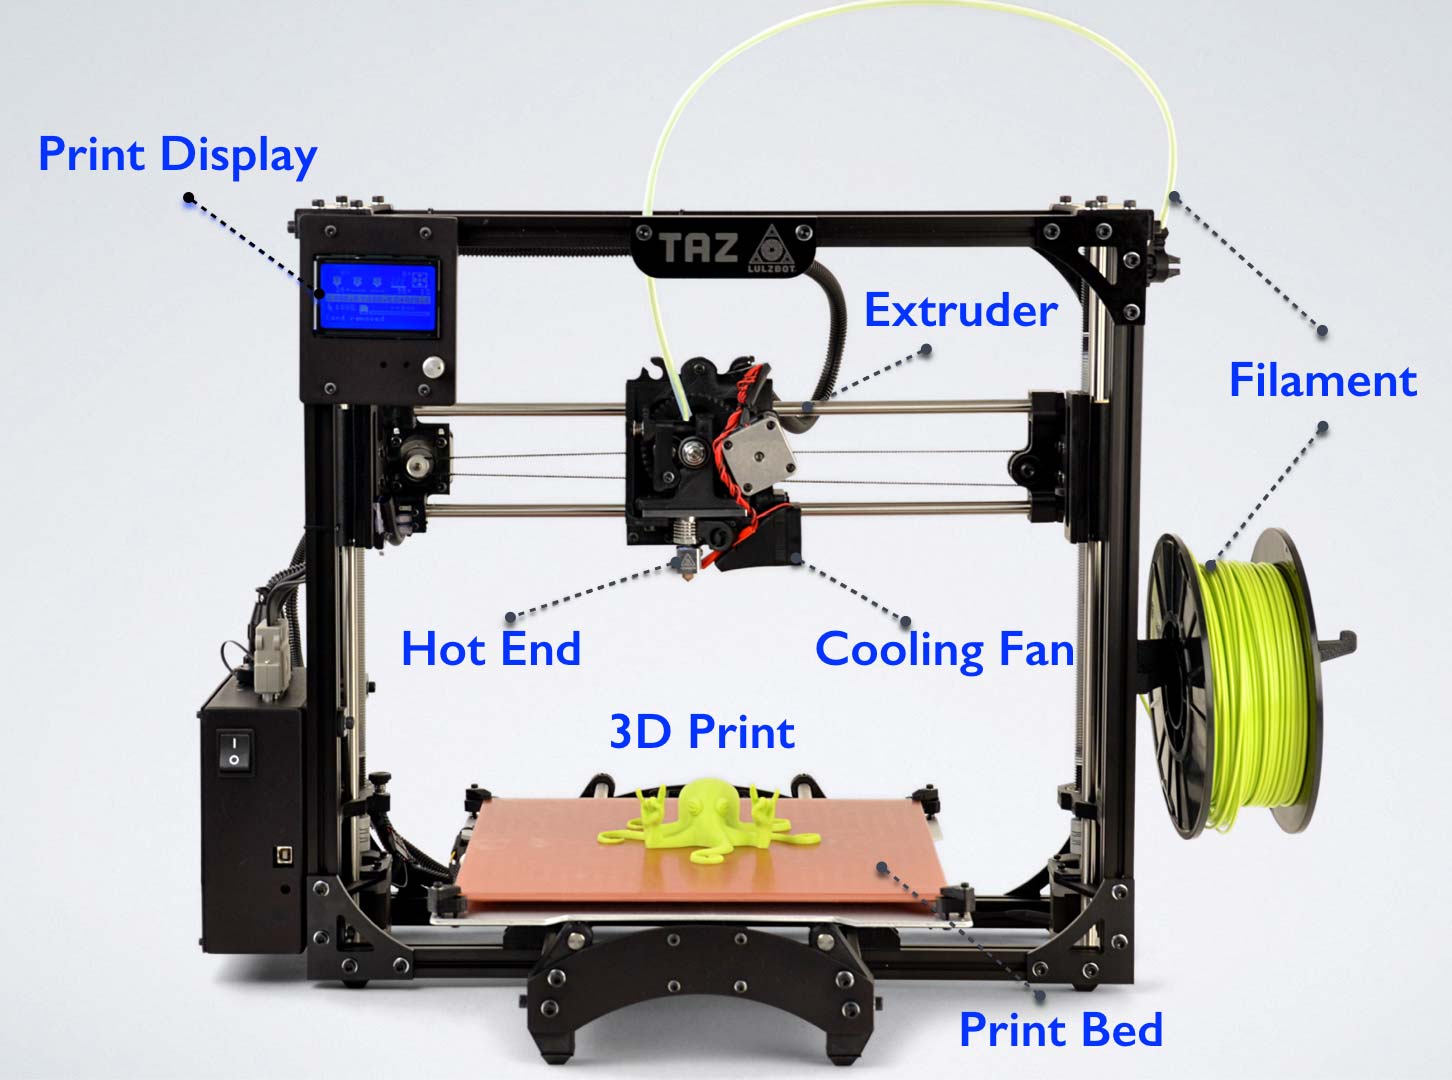 middag Lamme tsunamien 11 Things to Consider When Choosing Your First or Next Desktop 3D Printer